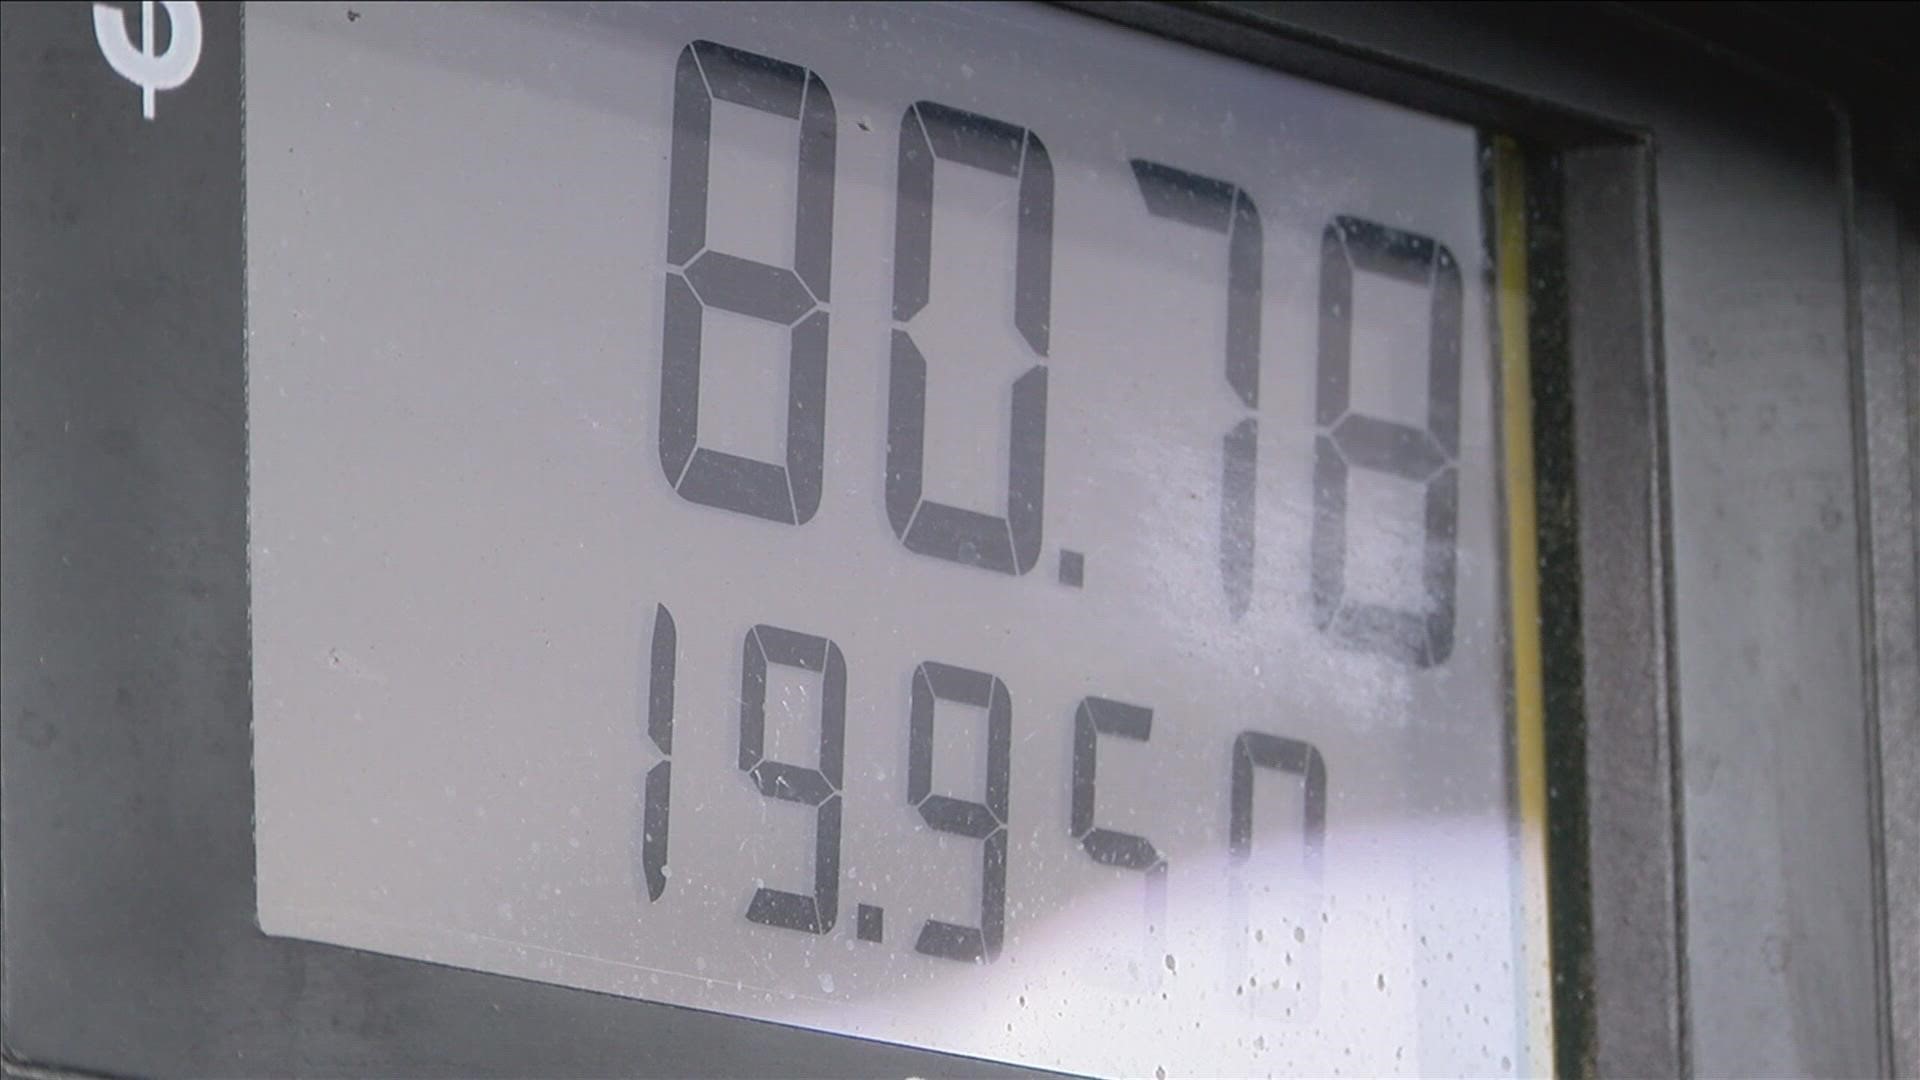 Some Memphis-area gas stations are near or below $4 a gallon. Economists believe we could see near $3 a gallon in September.